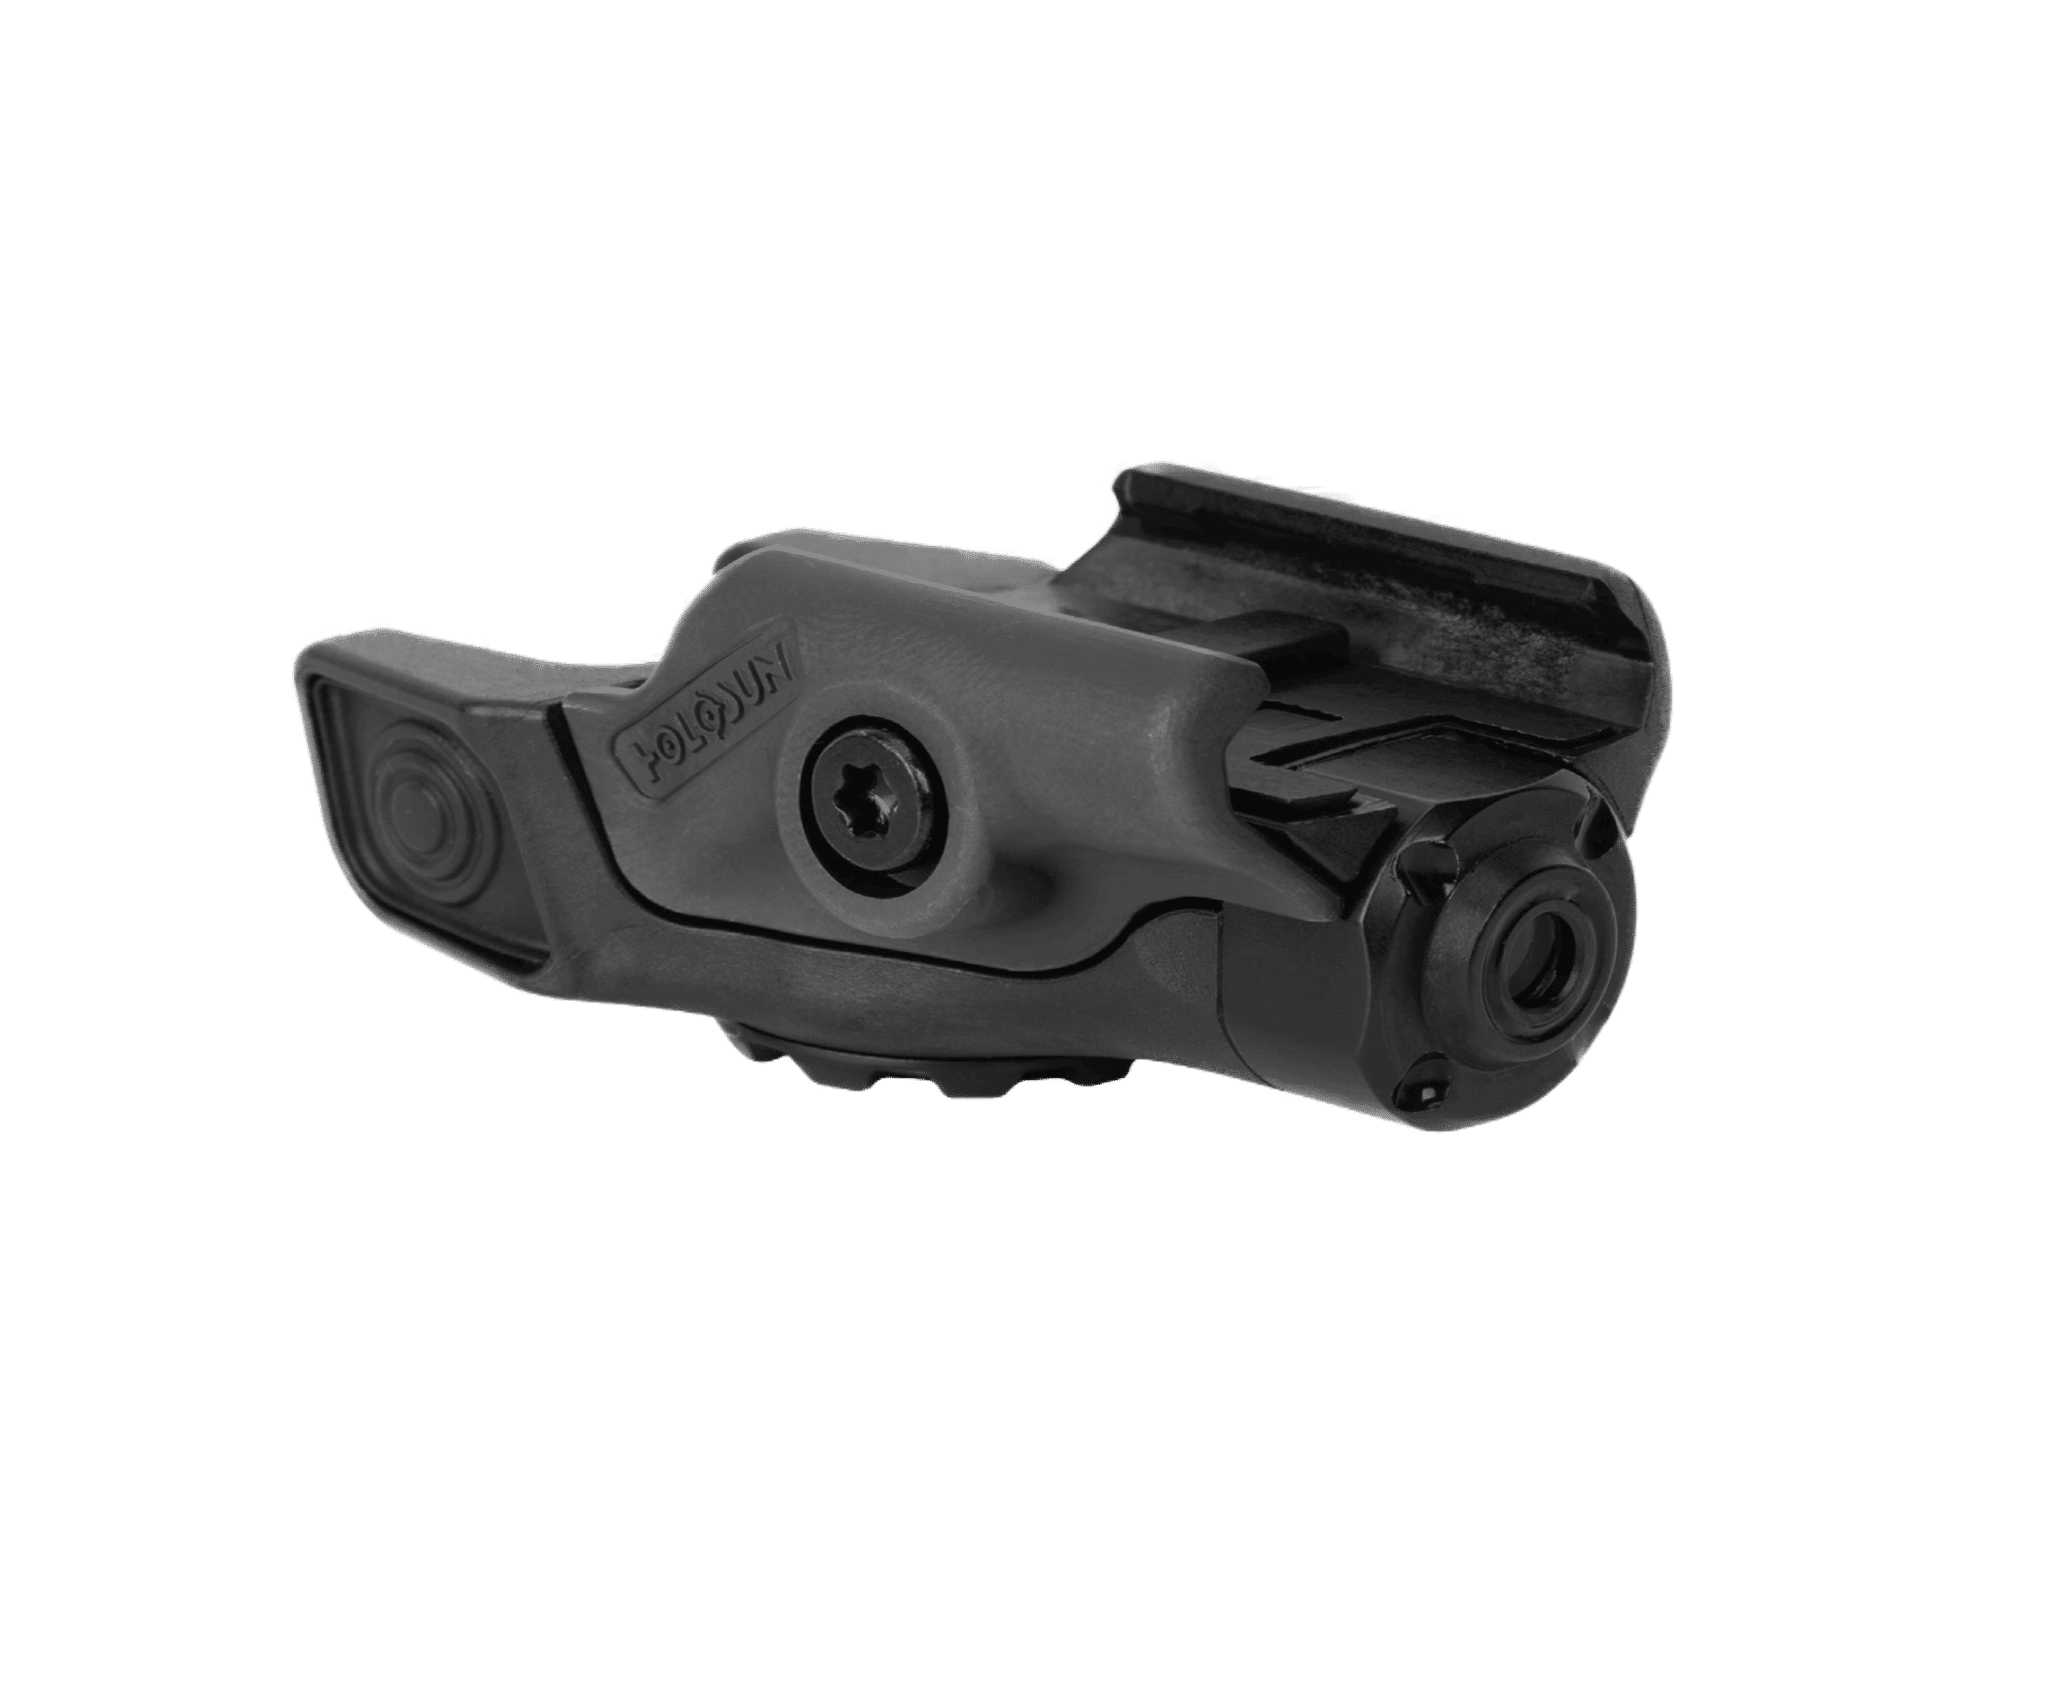 New Holosun RML\RMLt Rail Mounted Laser Available In Polymer Or Titanium